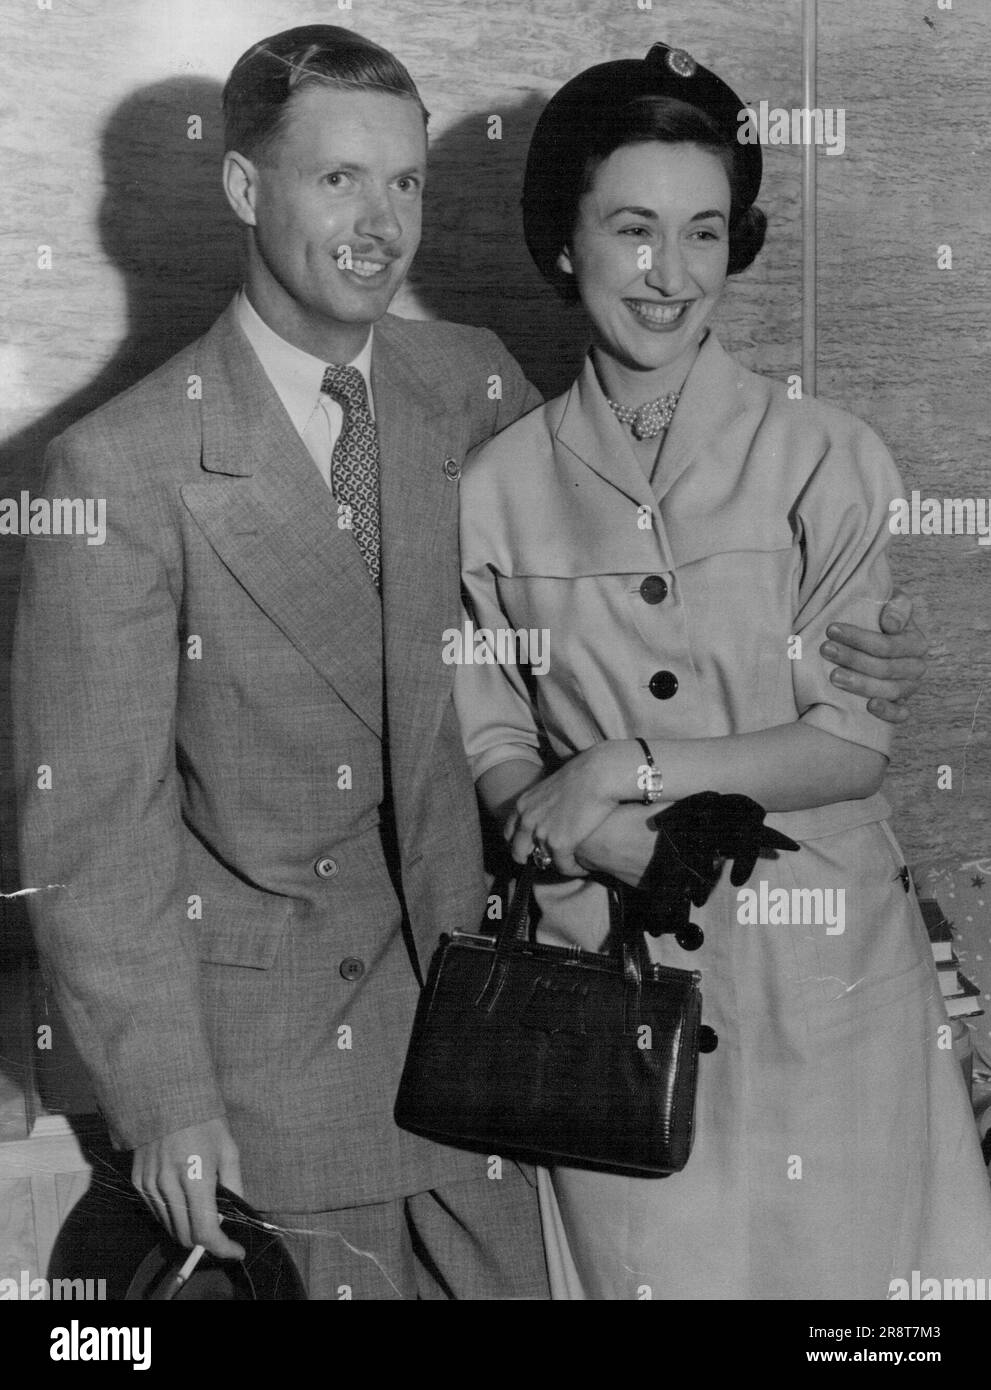 When the Himalaya berthed in Sydney this morning, Bill Tilley was waiting to greet his fiancee, Johneen Johnston, daughter of the S. A. Johnstons, of Neutral Bay. Bill, son of Mr. Frank Tilley, chairman of the Sydney Stock Exchange, and Mrs. Tilley, flew back from Melbourne where he met Johneen, who is wearing a most unusual ring-a huge oblong aquamarine, with diamond shoulders. November 7, 1949. Stock Photo